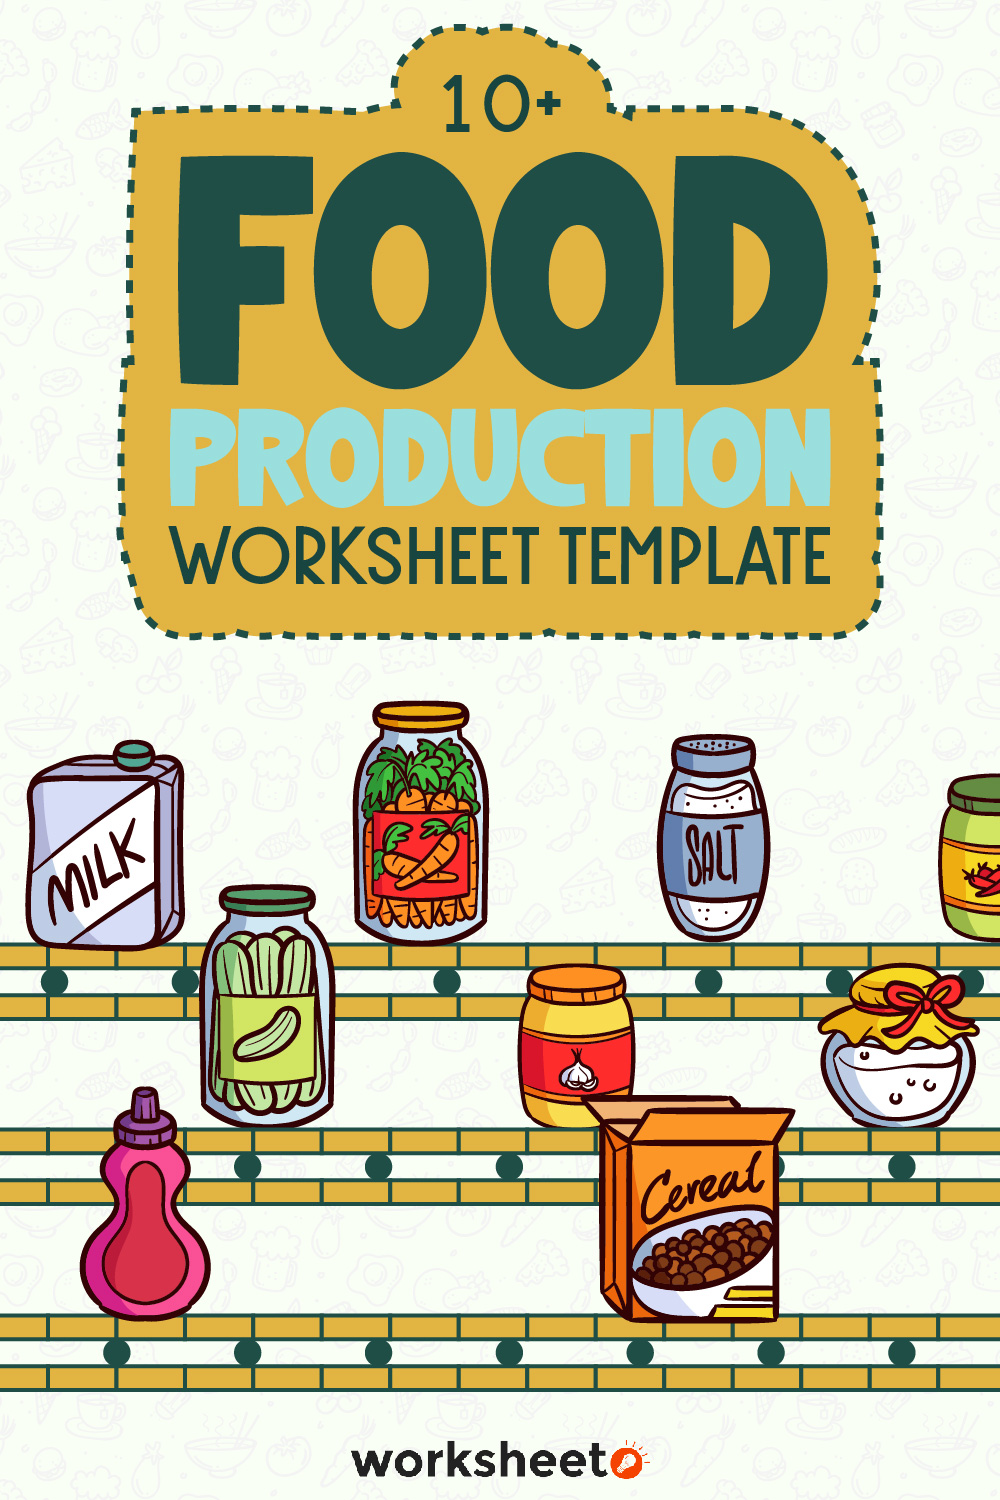 Food Production Worksheet Template